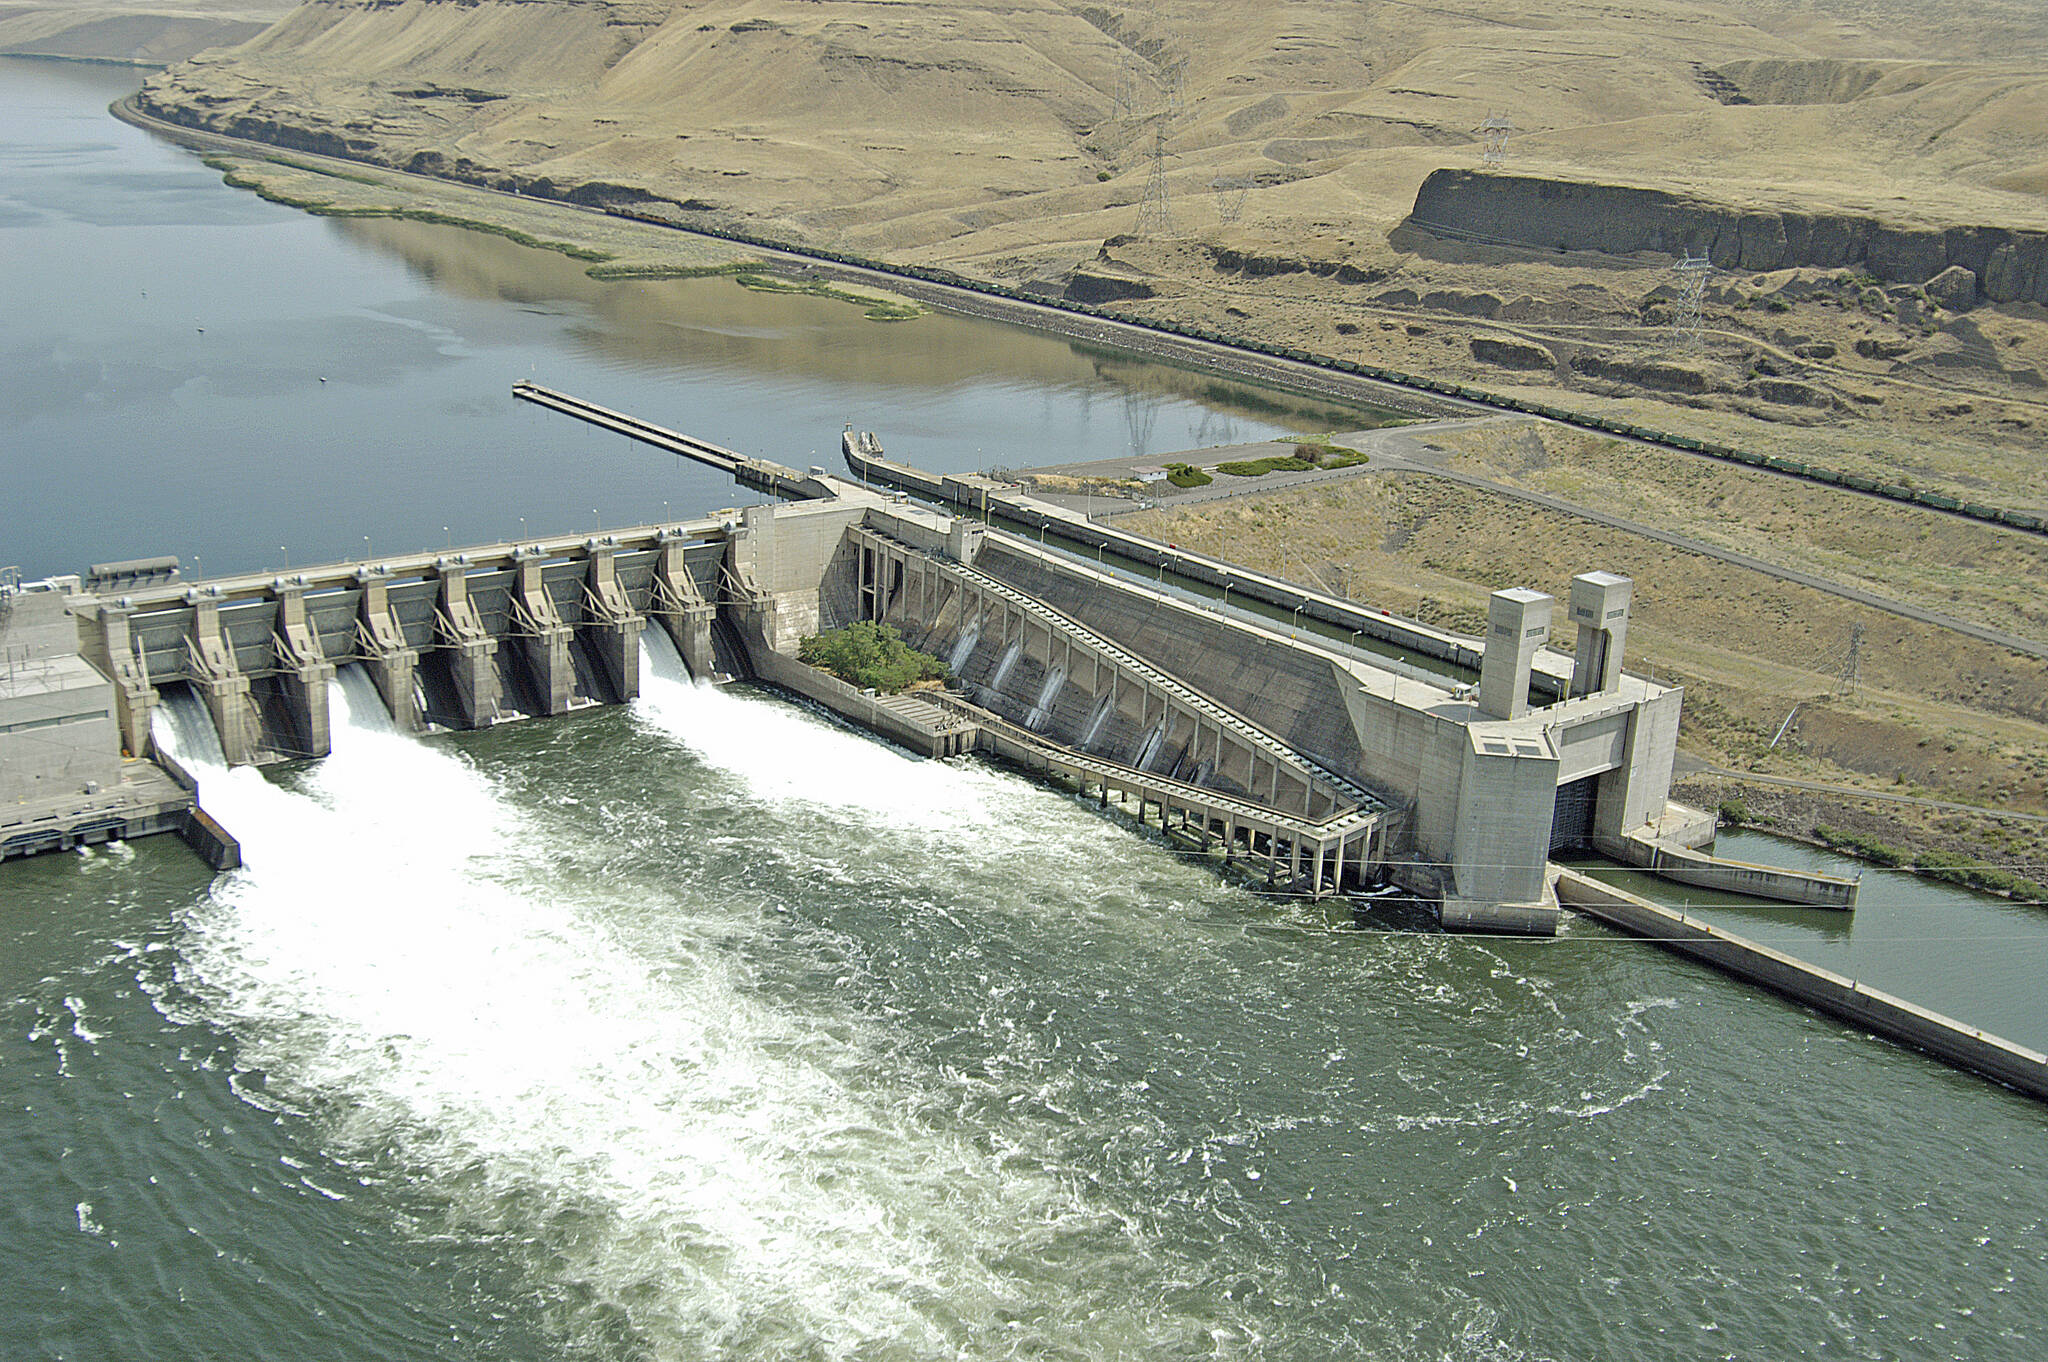 KEVIN WINGERT | BONNEVILLE POWER ADMINISTRATION The Lower Monumental Dam on the lower Snake River near Kahlotus is one of four lower Snake hydroelectric dams in the Federal Columbia River Power System.
The Lower Monumental Dam on the lower Snake River near Kahlotus is one of four lower Snake hydroelectric dams in the Federal Columbia River Power System. Kevin Wingert/BPA photo